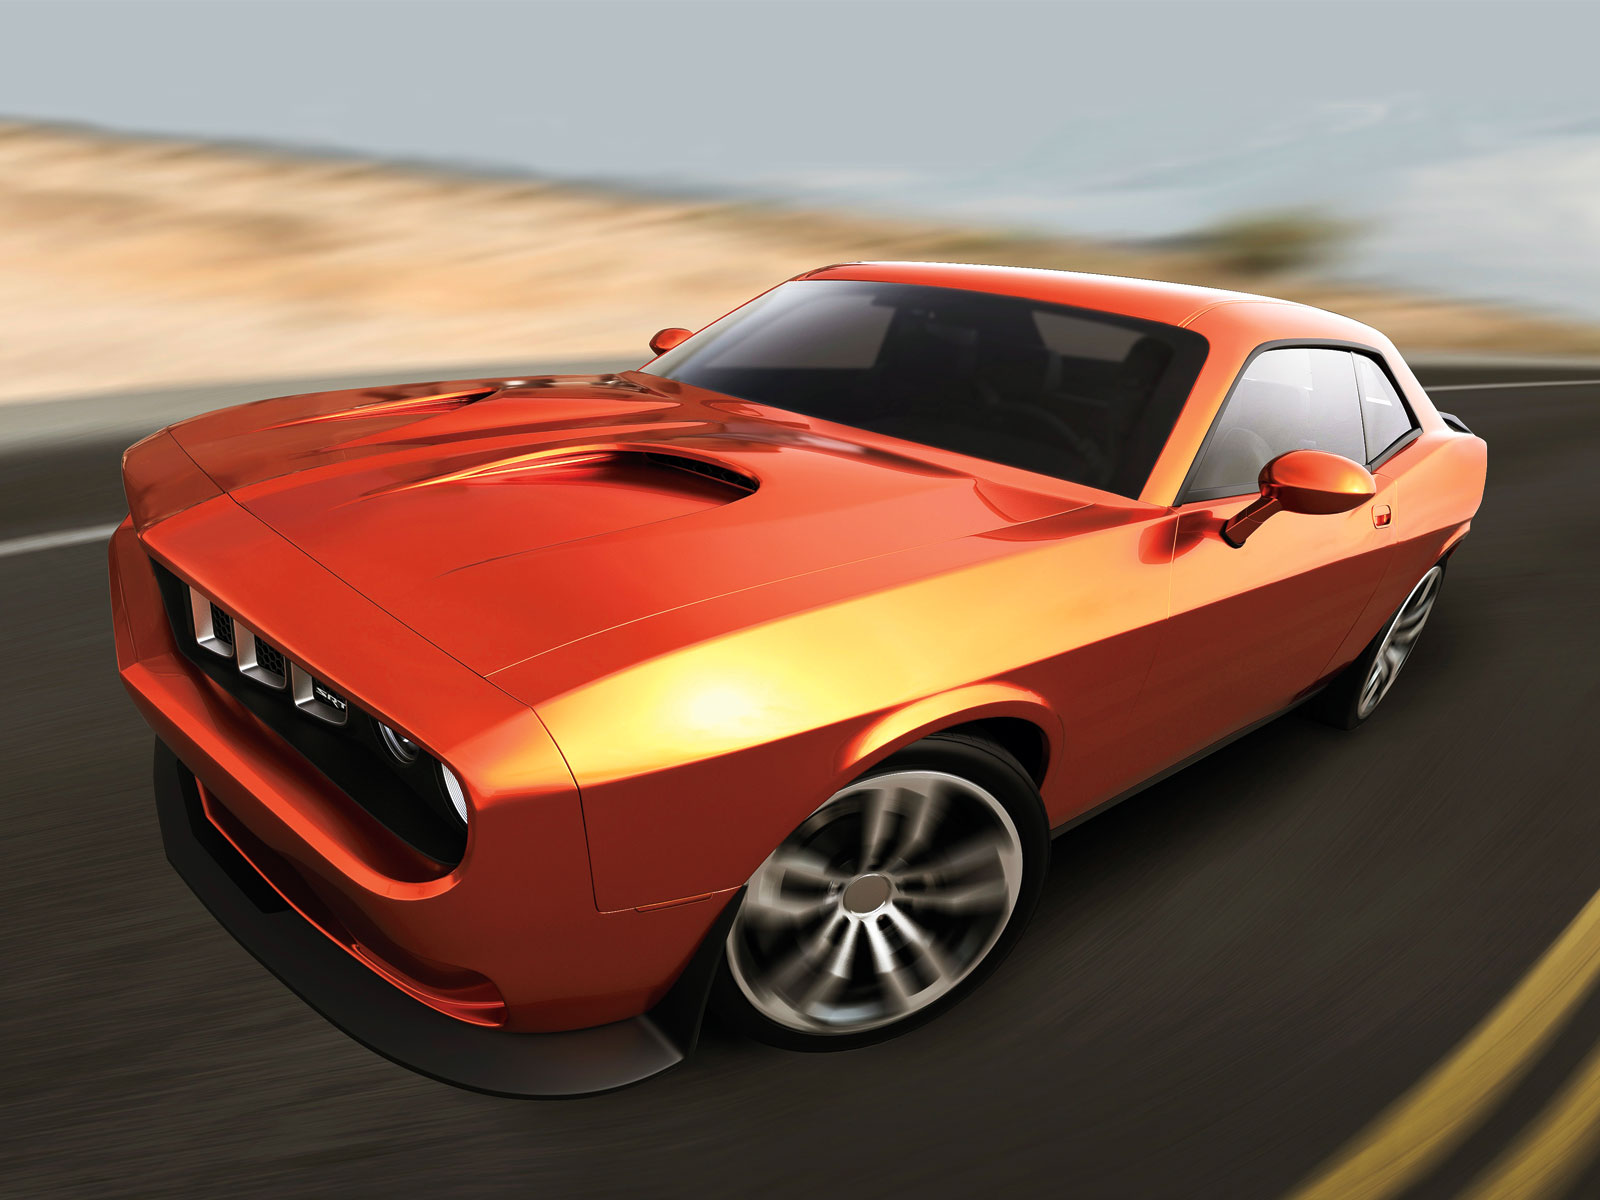 2015, Plymouth, Srt, Cuda, Concept, Muscle Wallpaper